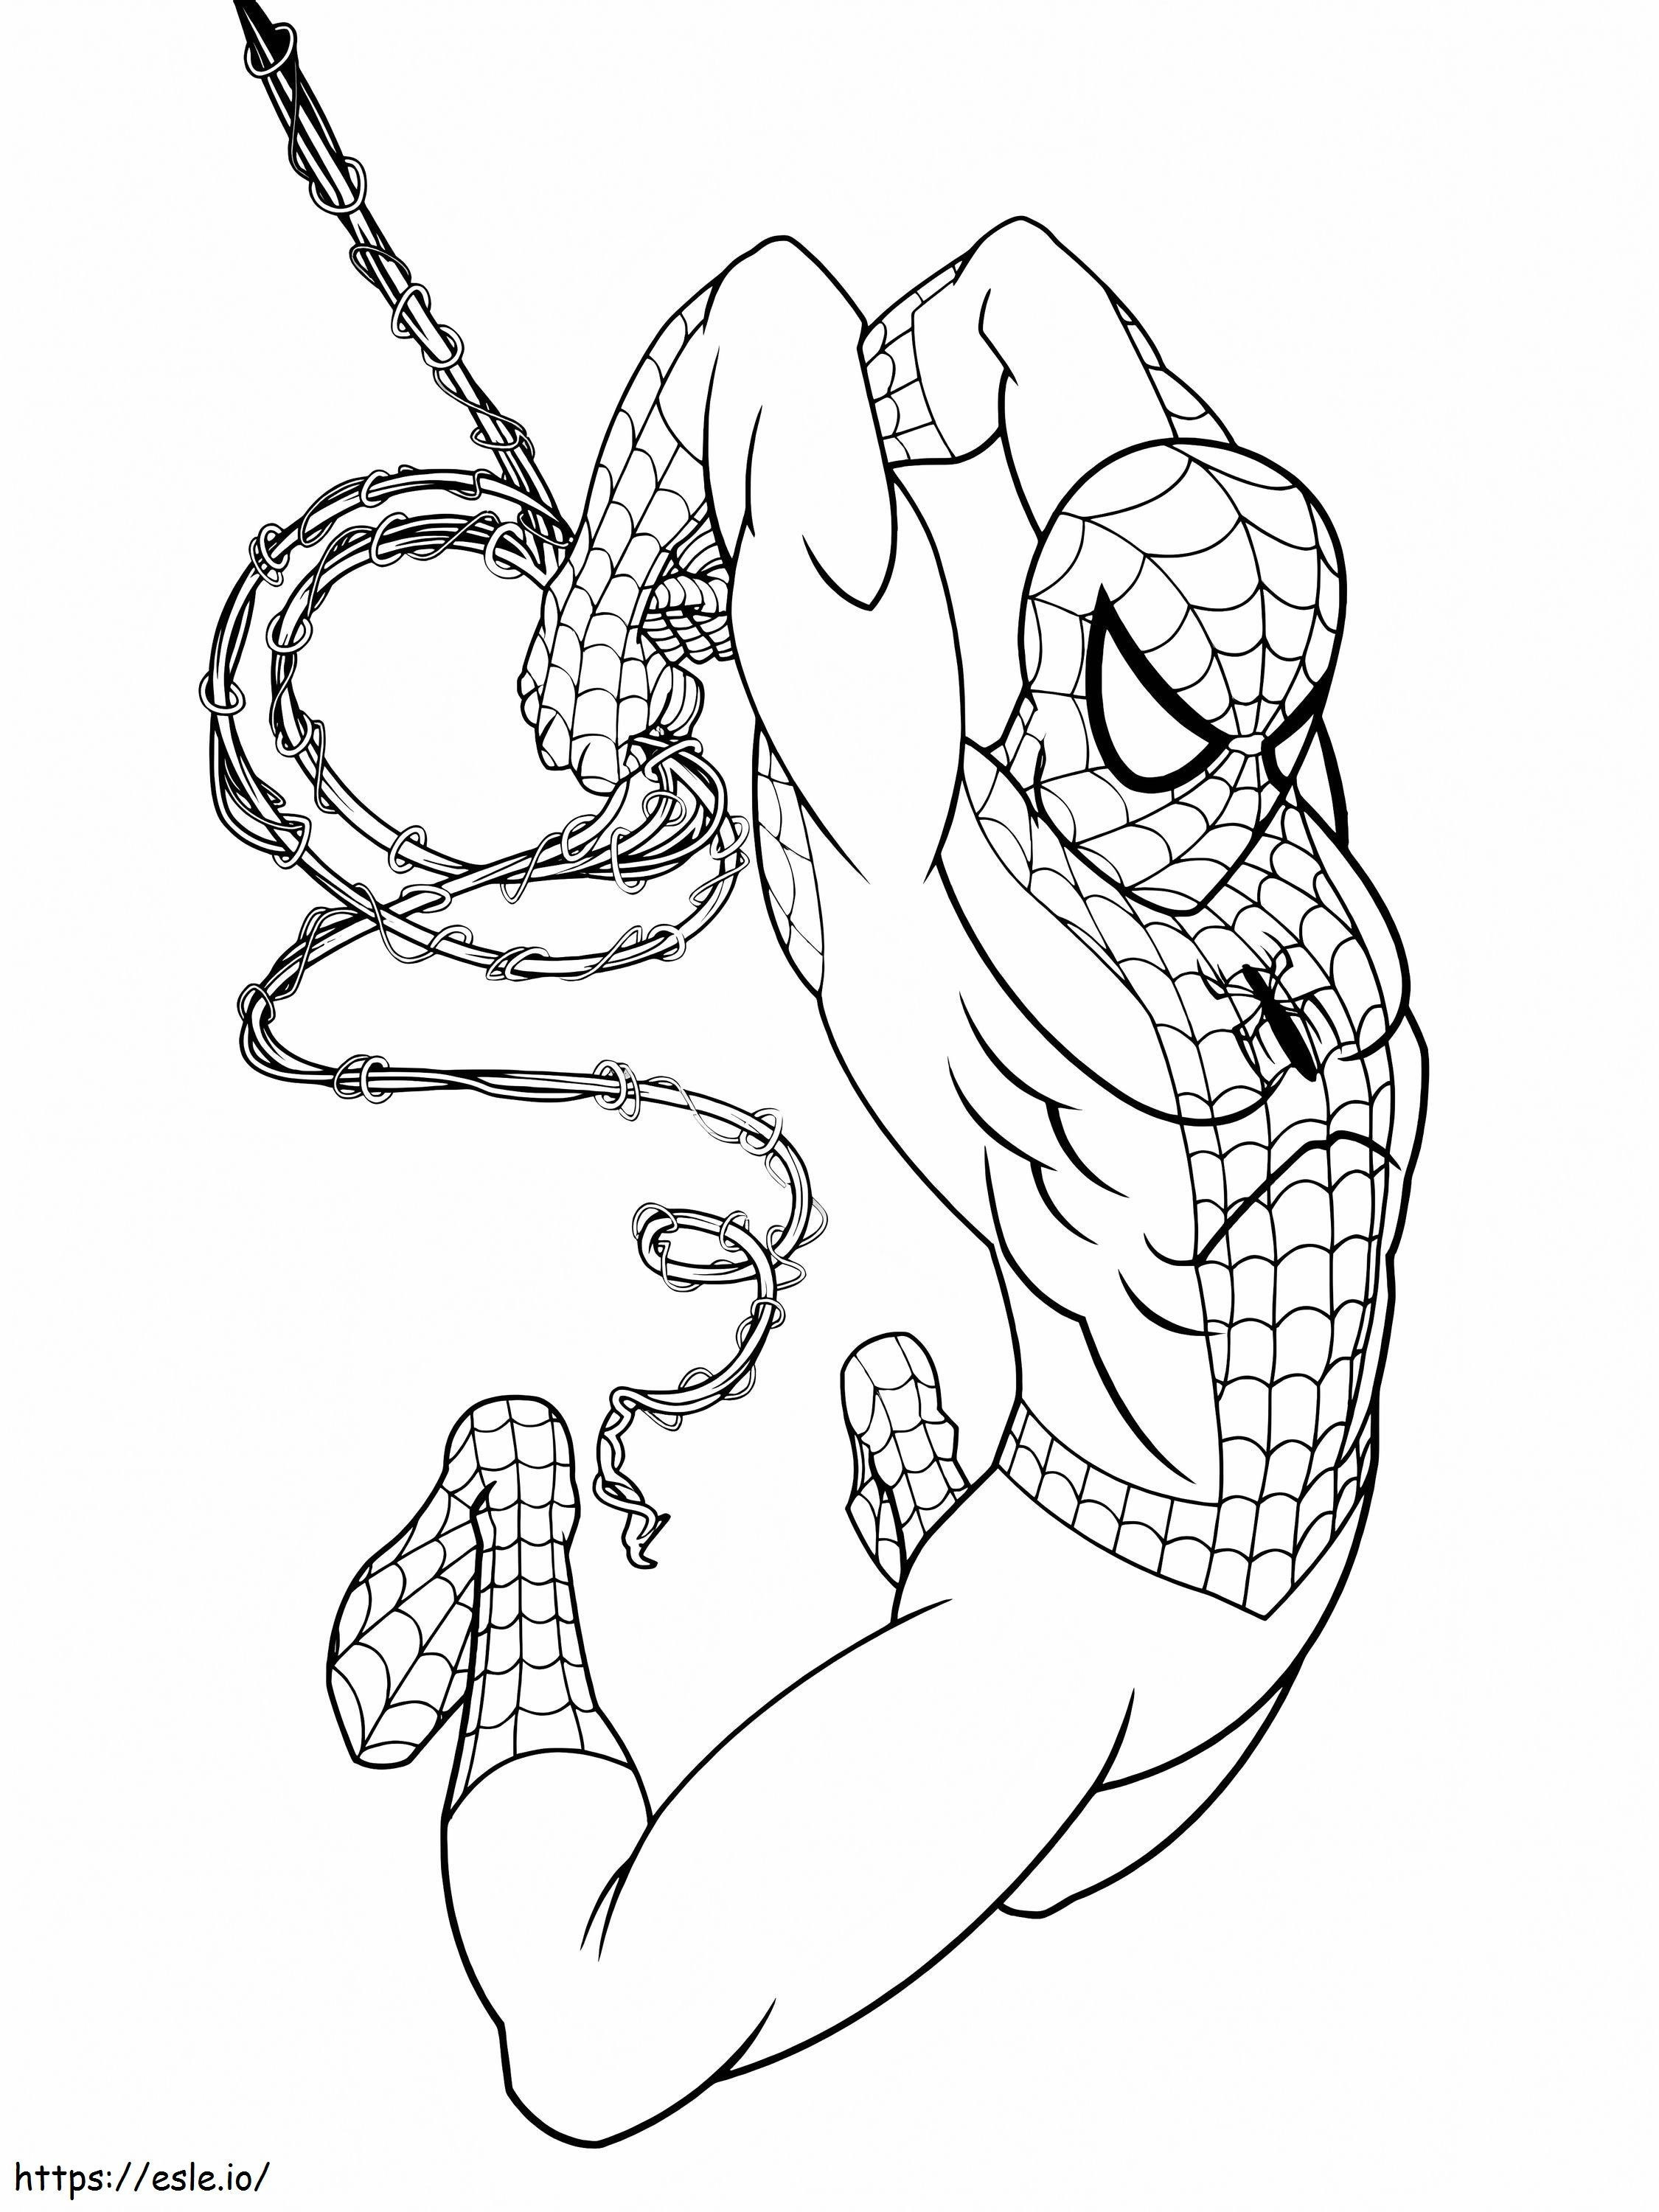 Spiderman Attack coloring page